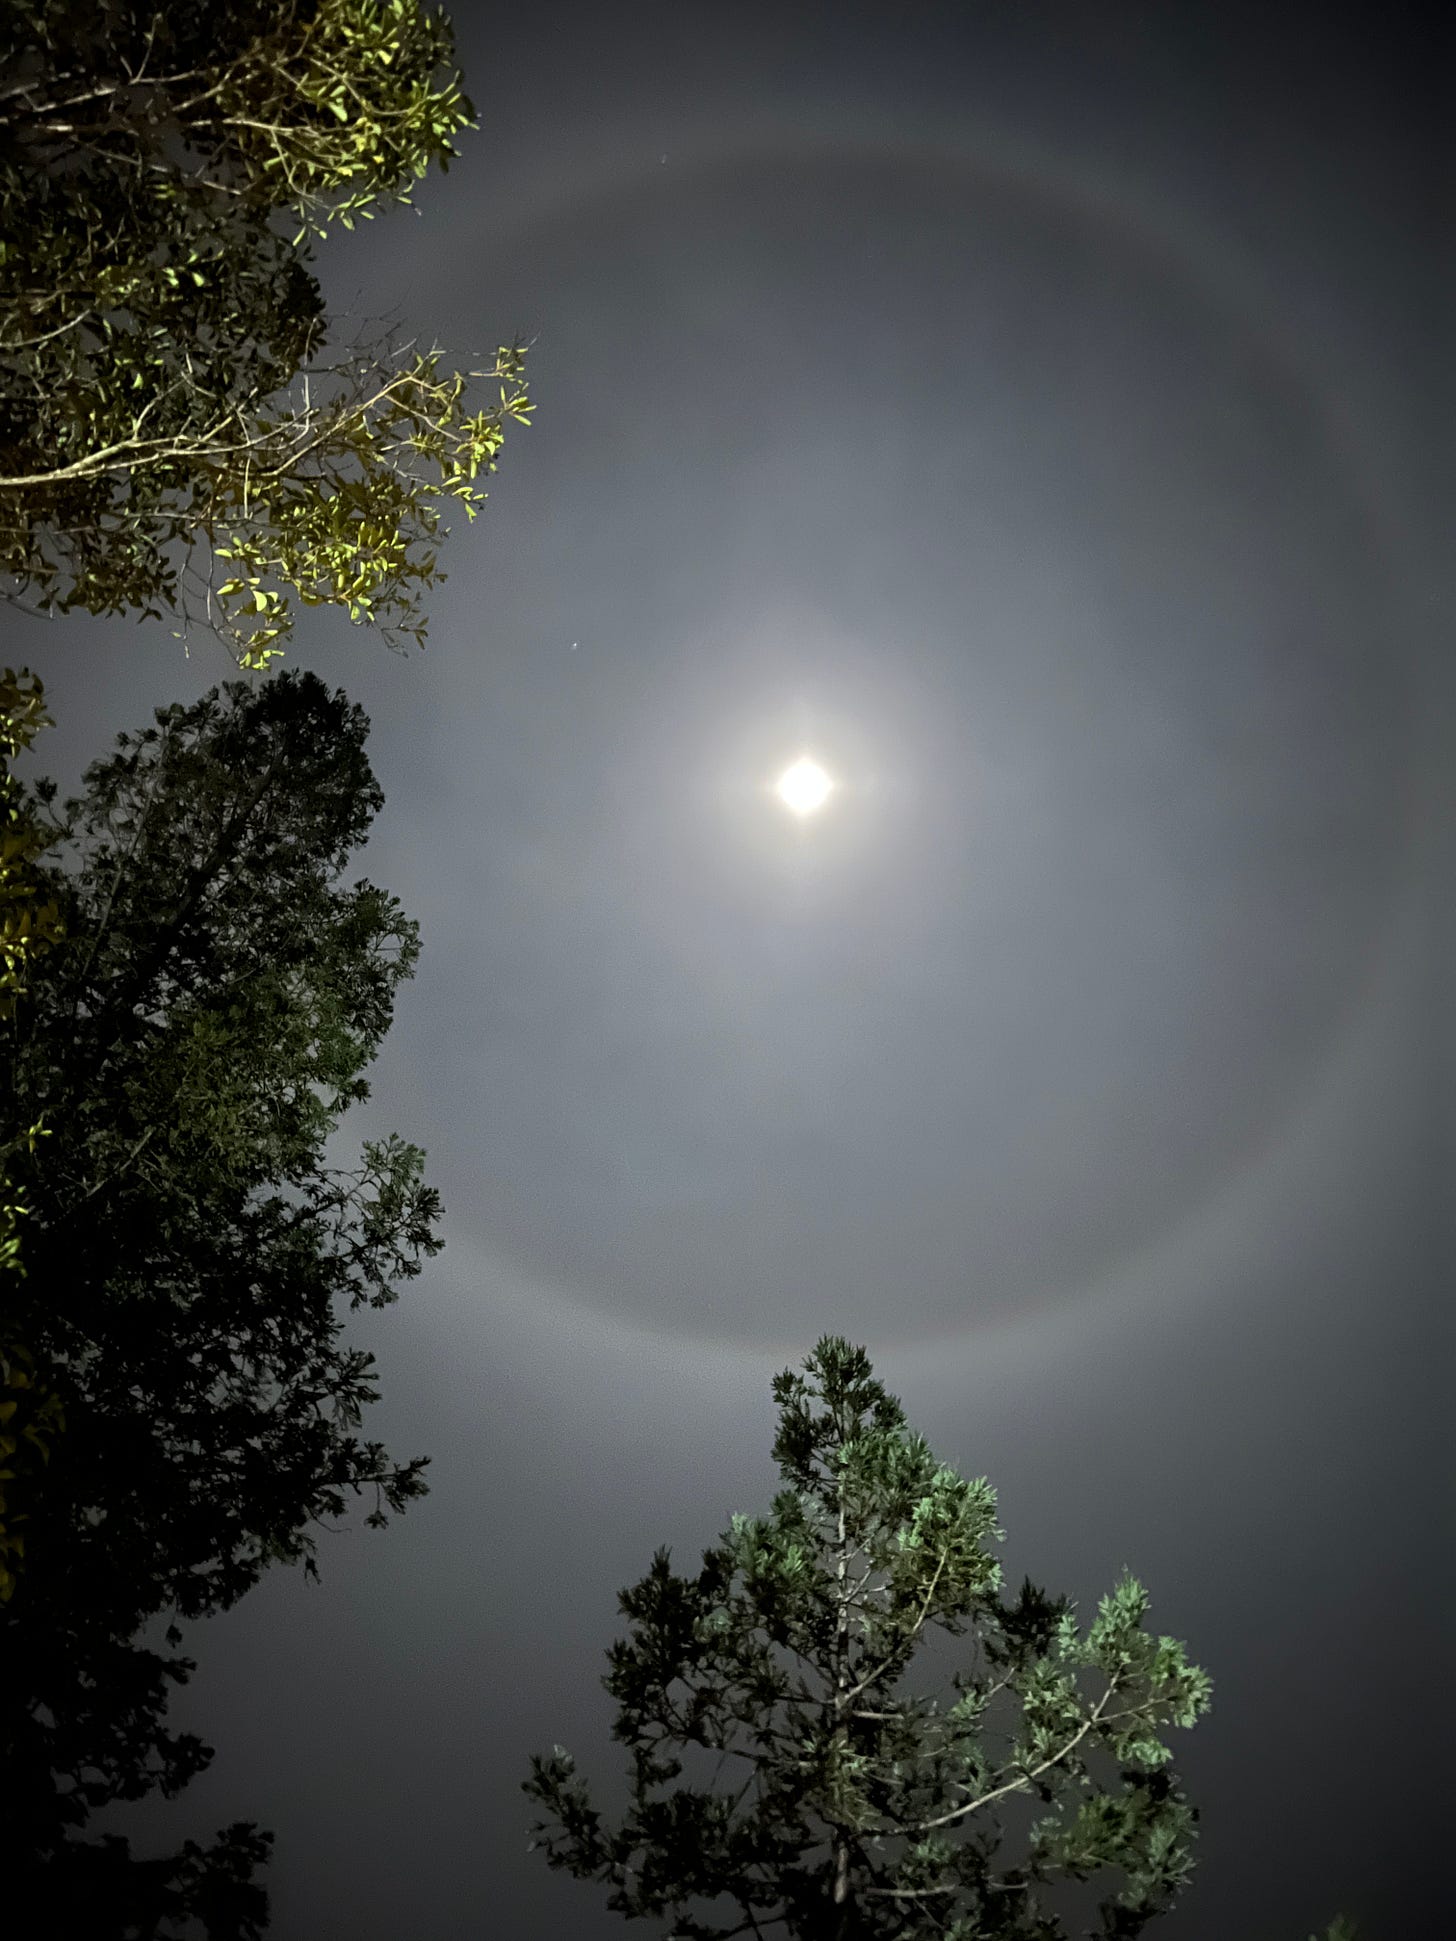 A lunar halo from earlier this month